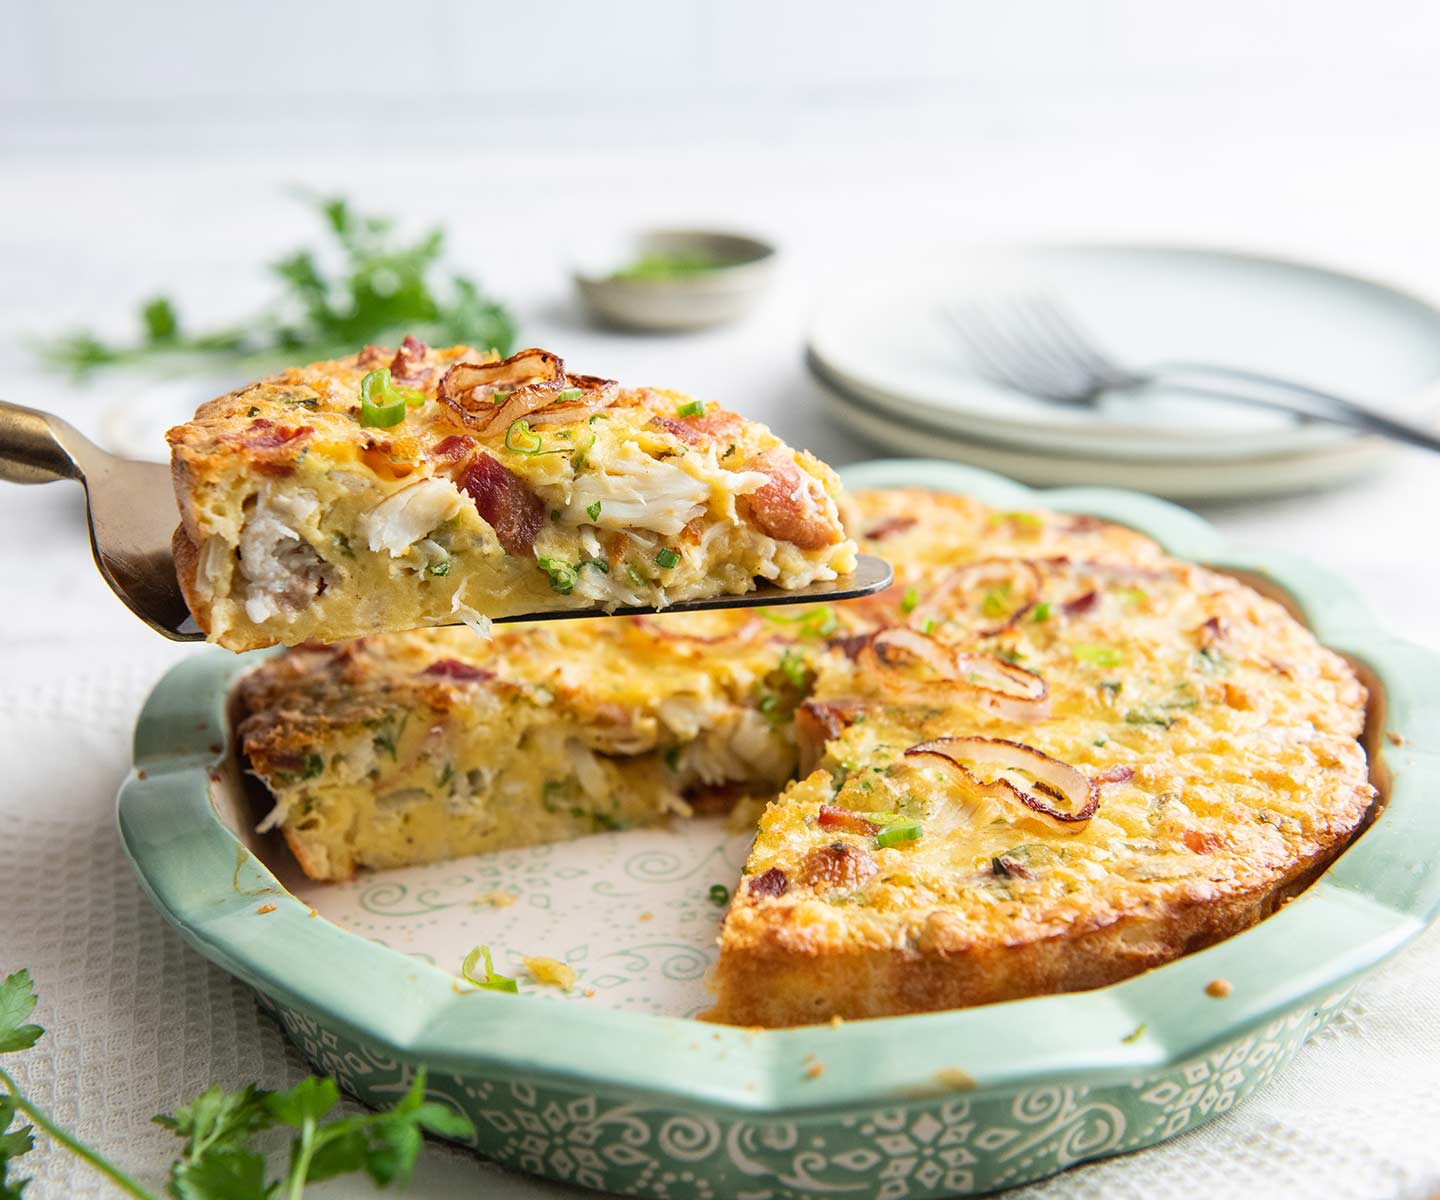 Herby Crustless Quiche with Crab and Bacon | Chicken of the Sea